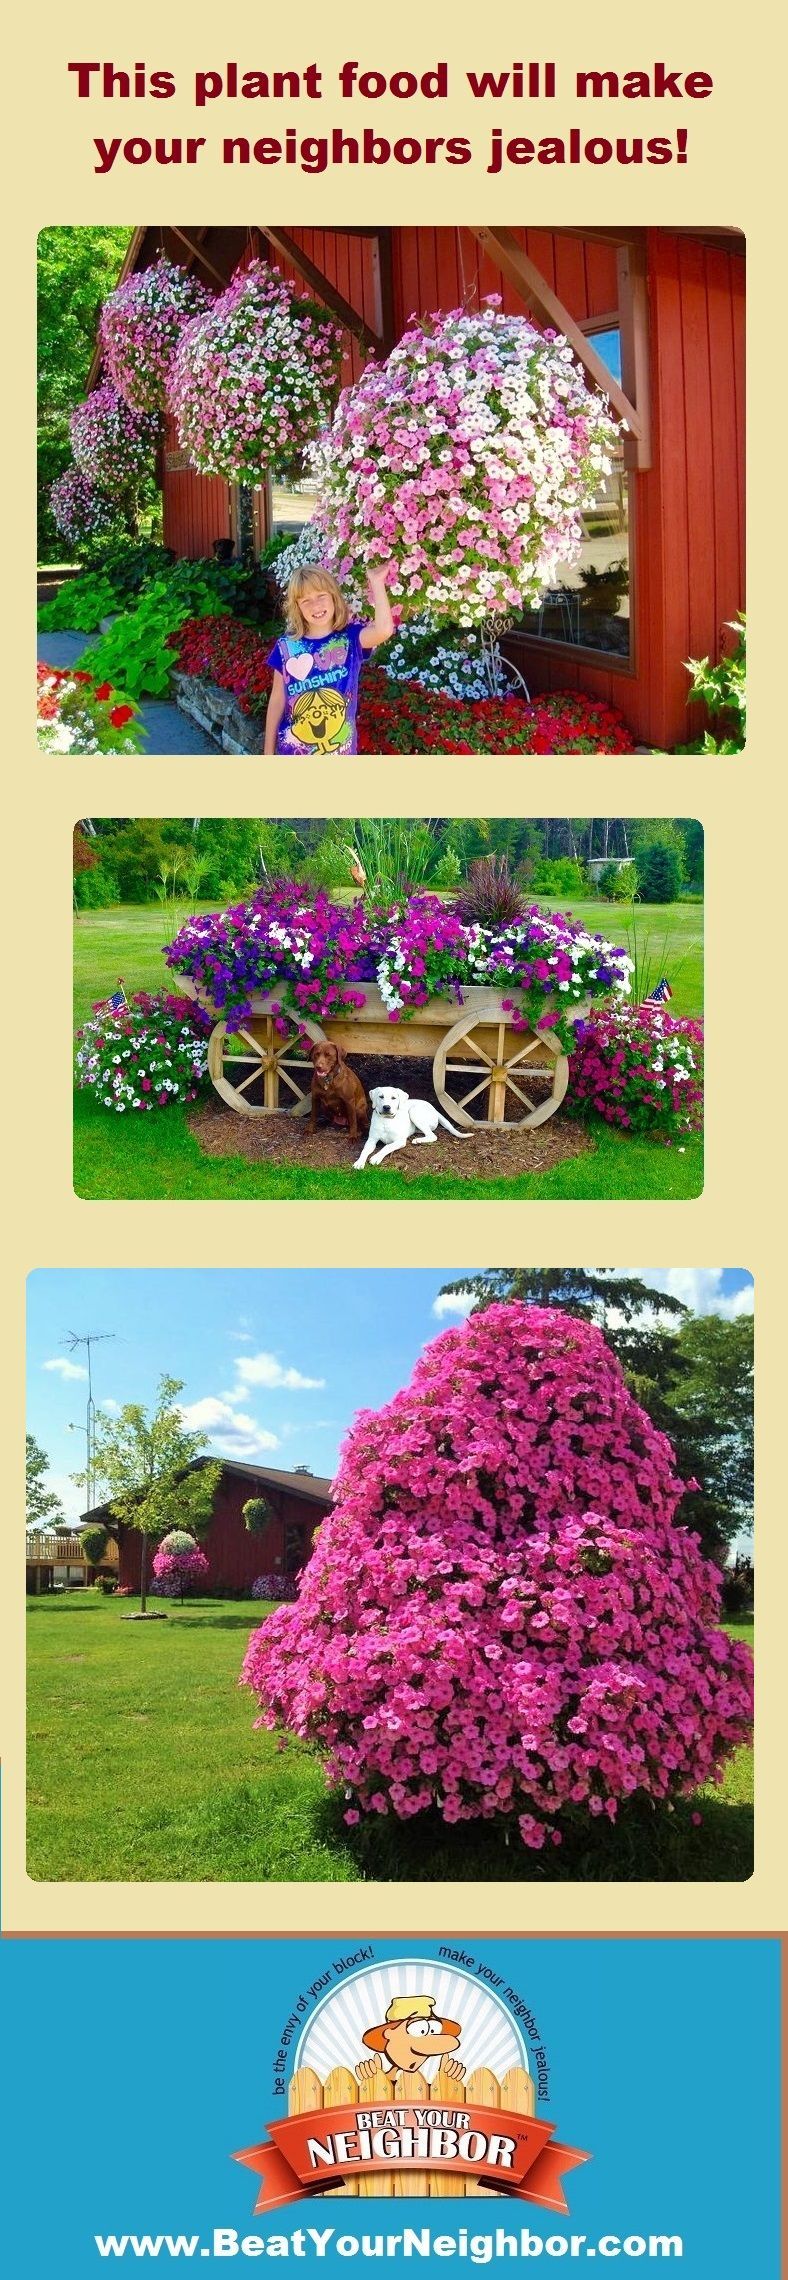 If you want huge flowers this year, you need to check out www.BeatYourNeighbor.com -   19 plants Climbing decks
 ideas